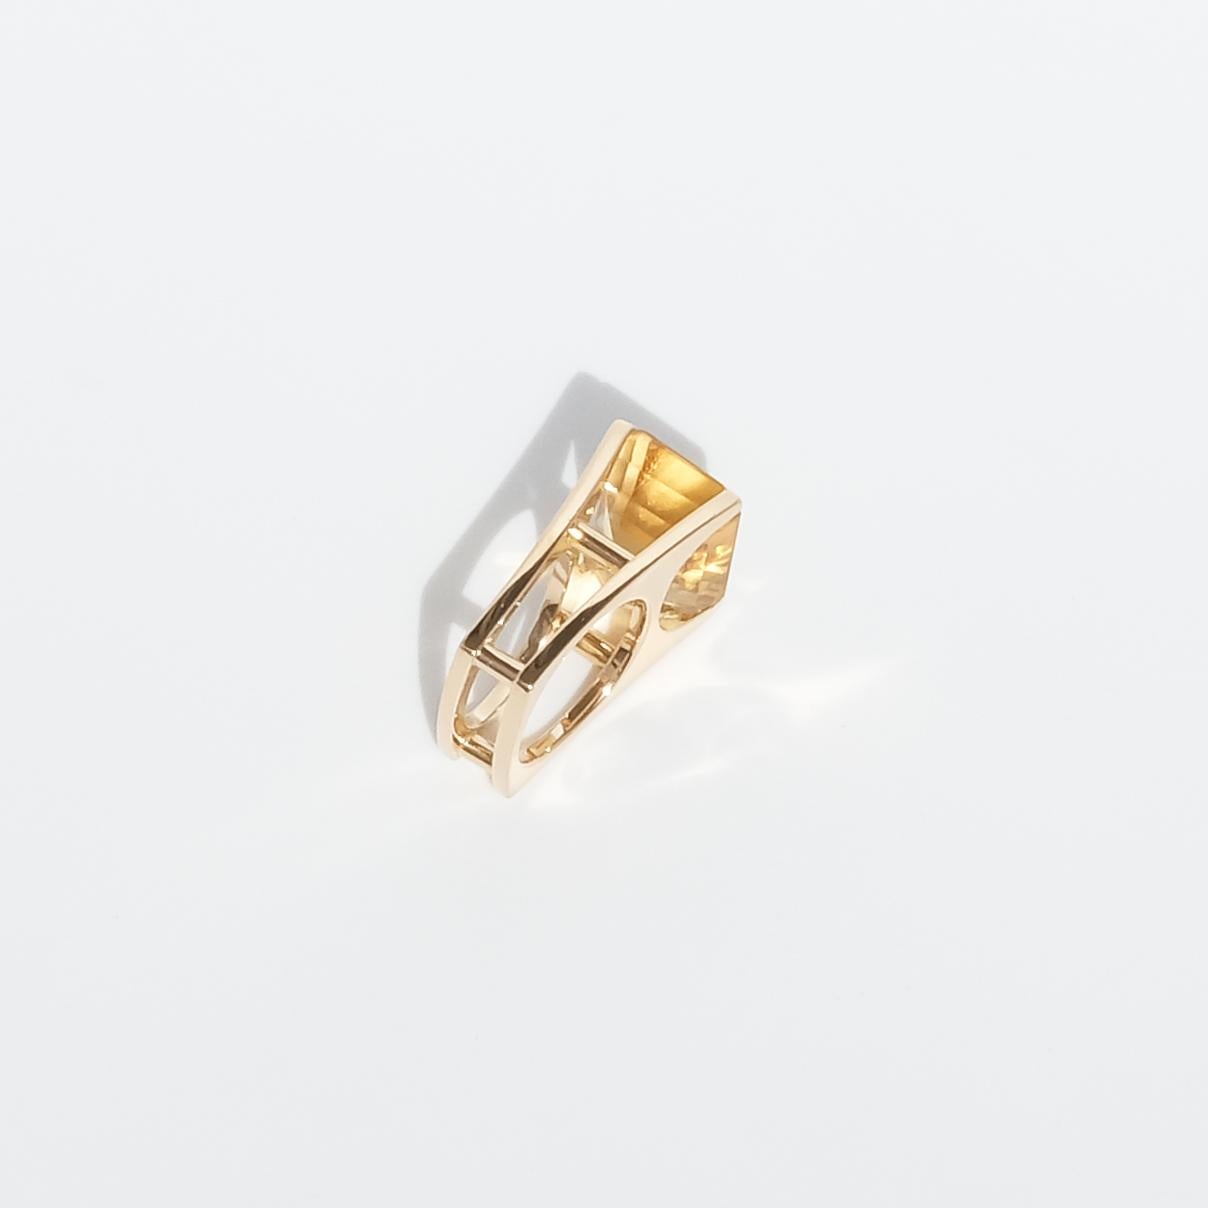 This 18 karat gold ring is has an exquisite design with its high shaped shank and setting. It is adorned with a baguette cut citrine with facets that create this typical hypnotic hall-of-mirrors effect within the stone. The square shaped shank goes